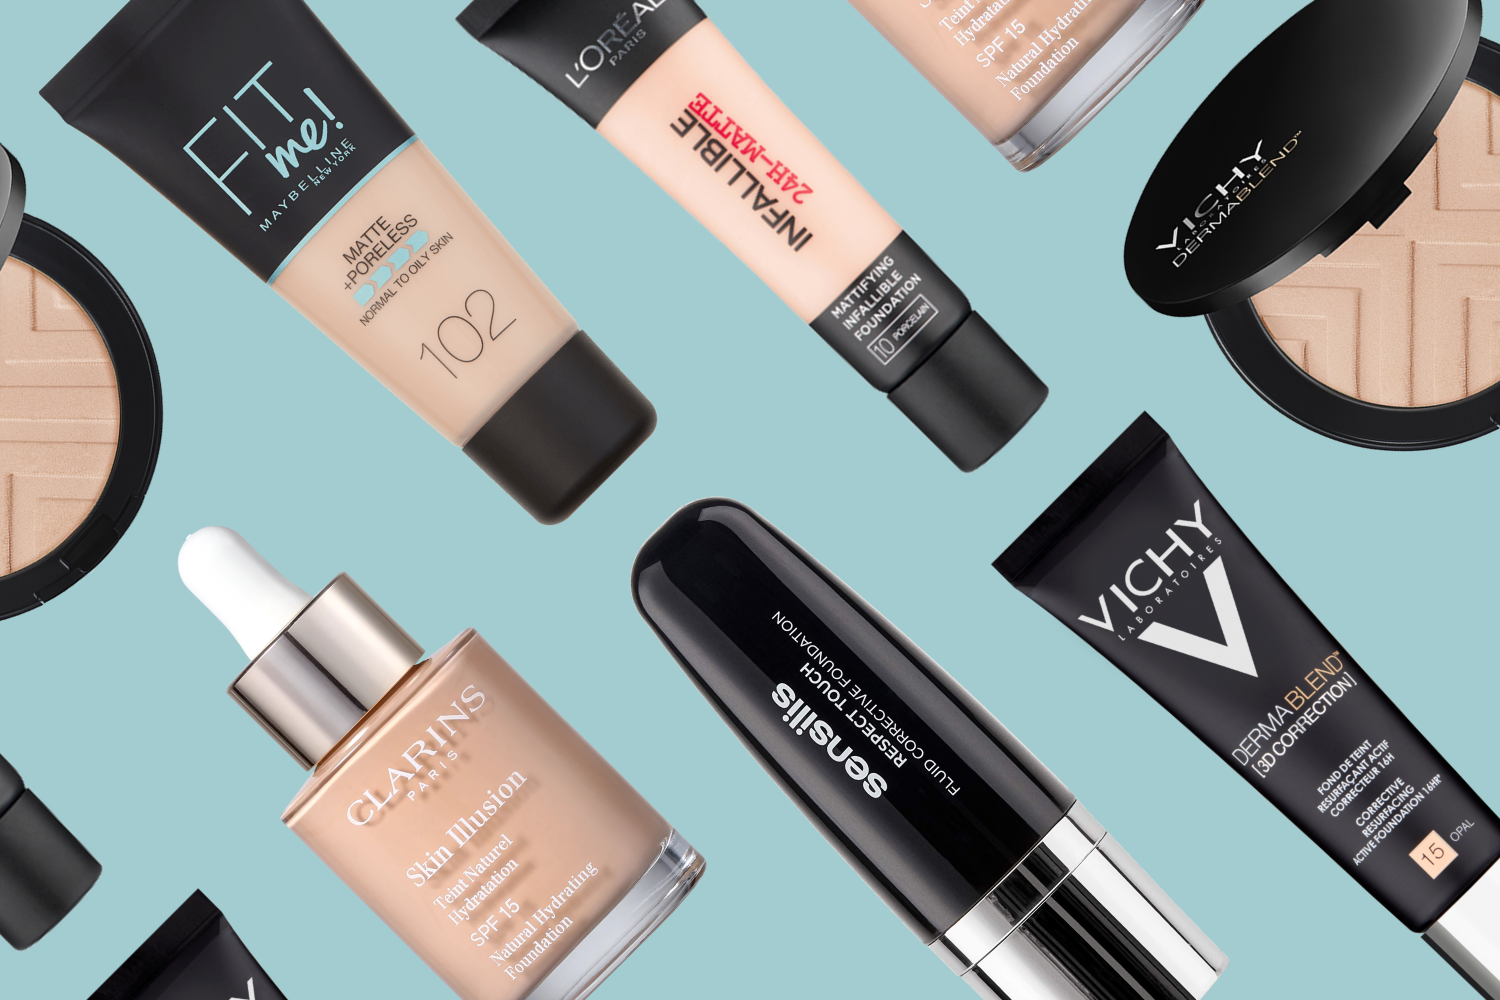 The Best Foundations For Oily Skin In 2020 · Care To Beauty